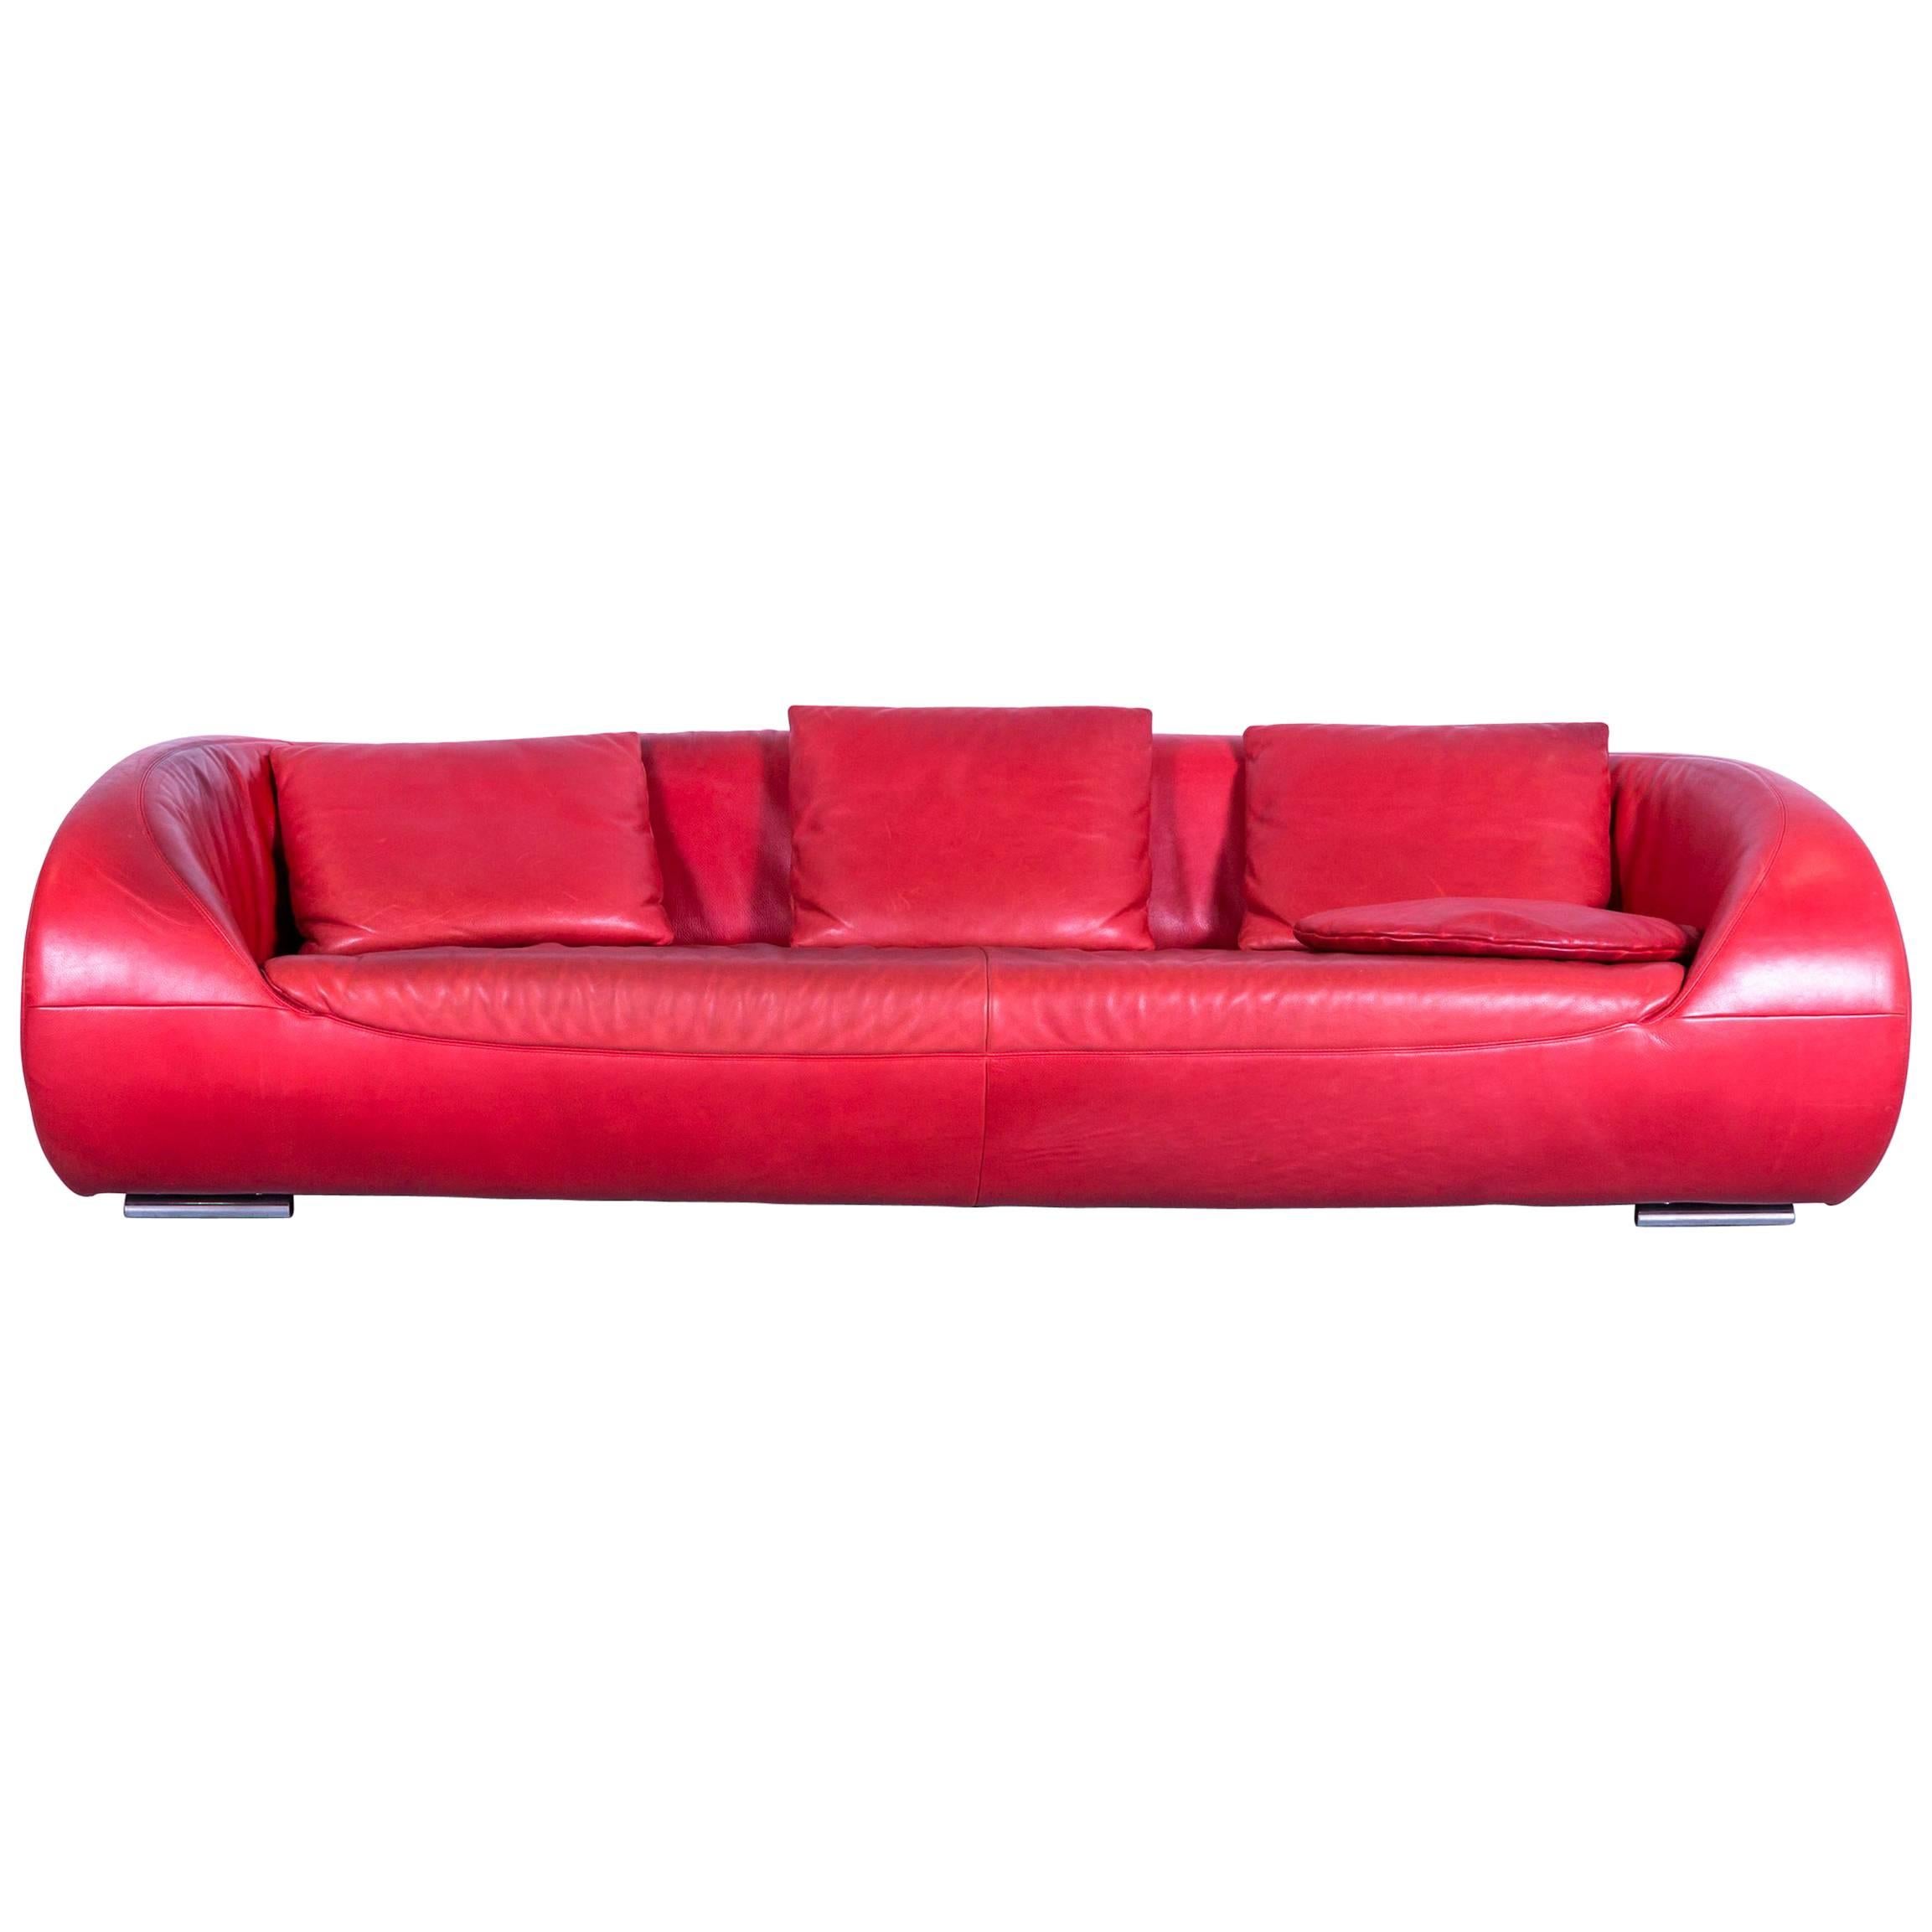 Sofa Made In Germany - For Sale on 1stDibs